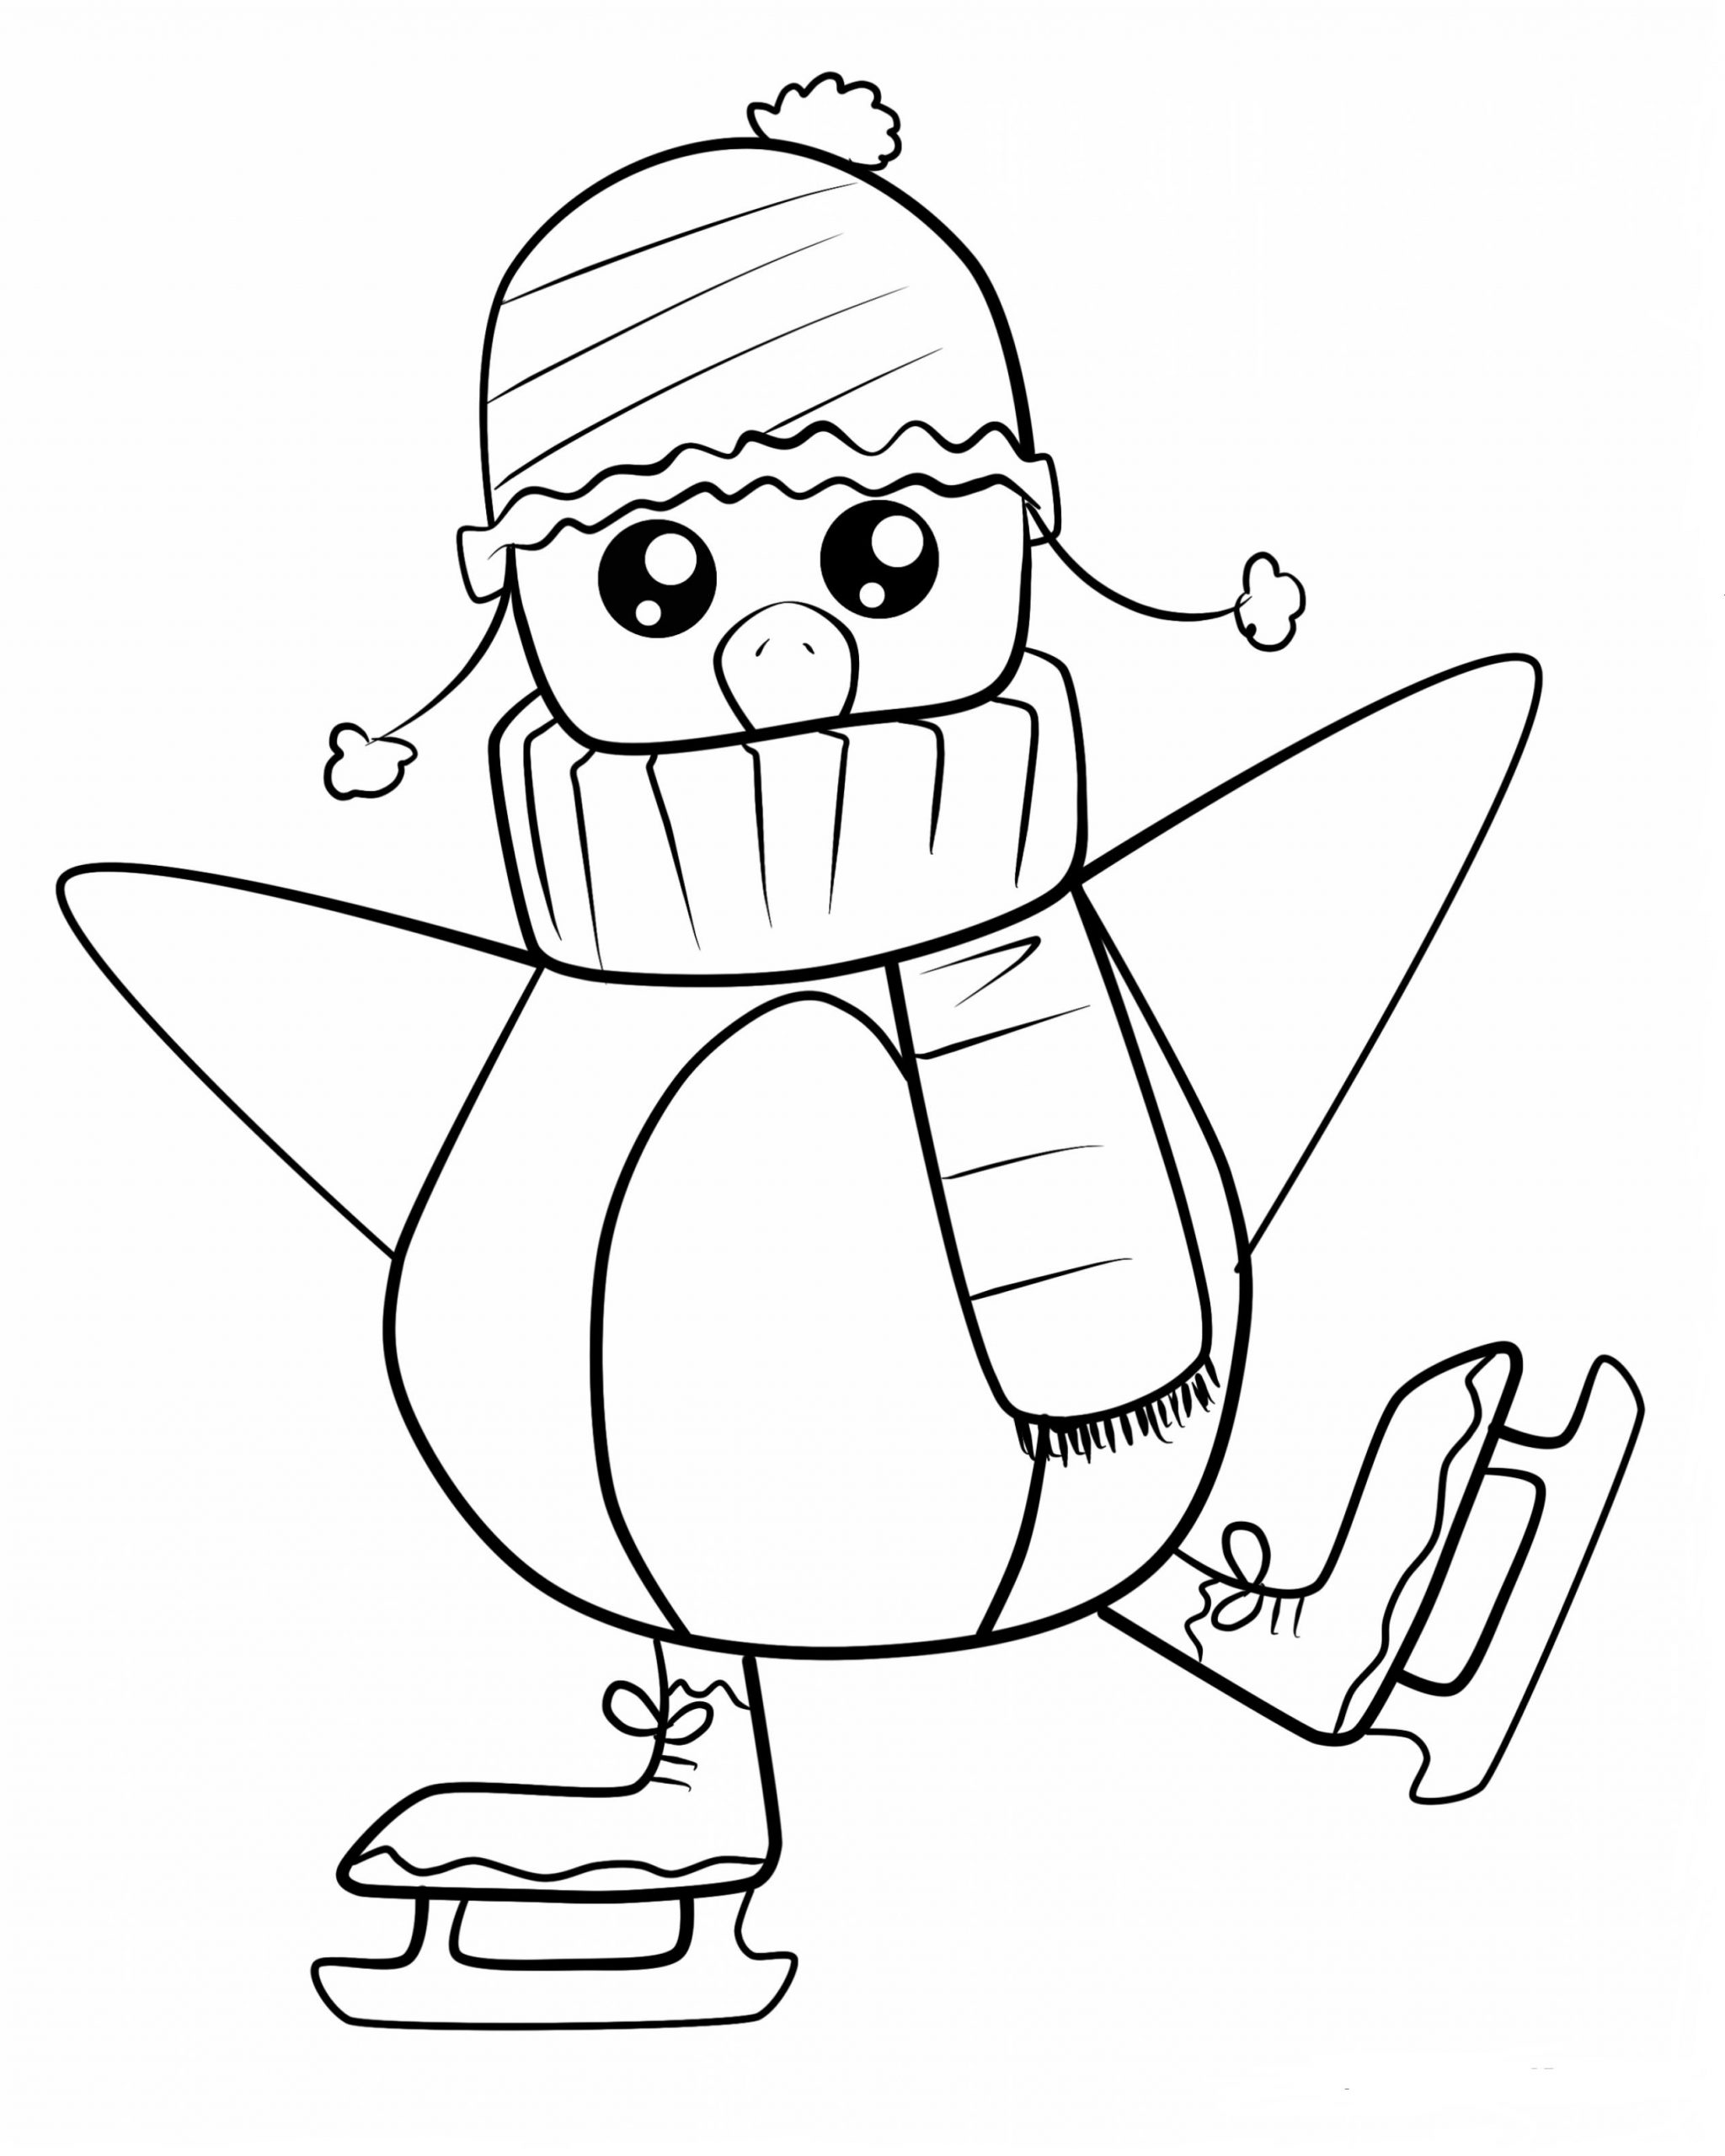 1544403022_picture-christmas-hunting-coloring-pages-4-perfect-ideas-cute-astonishing-penguin-page para colorir